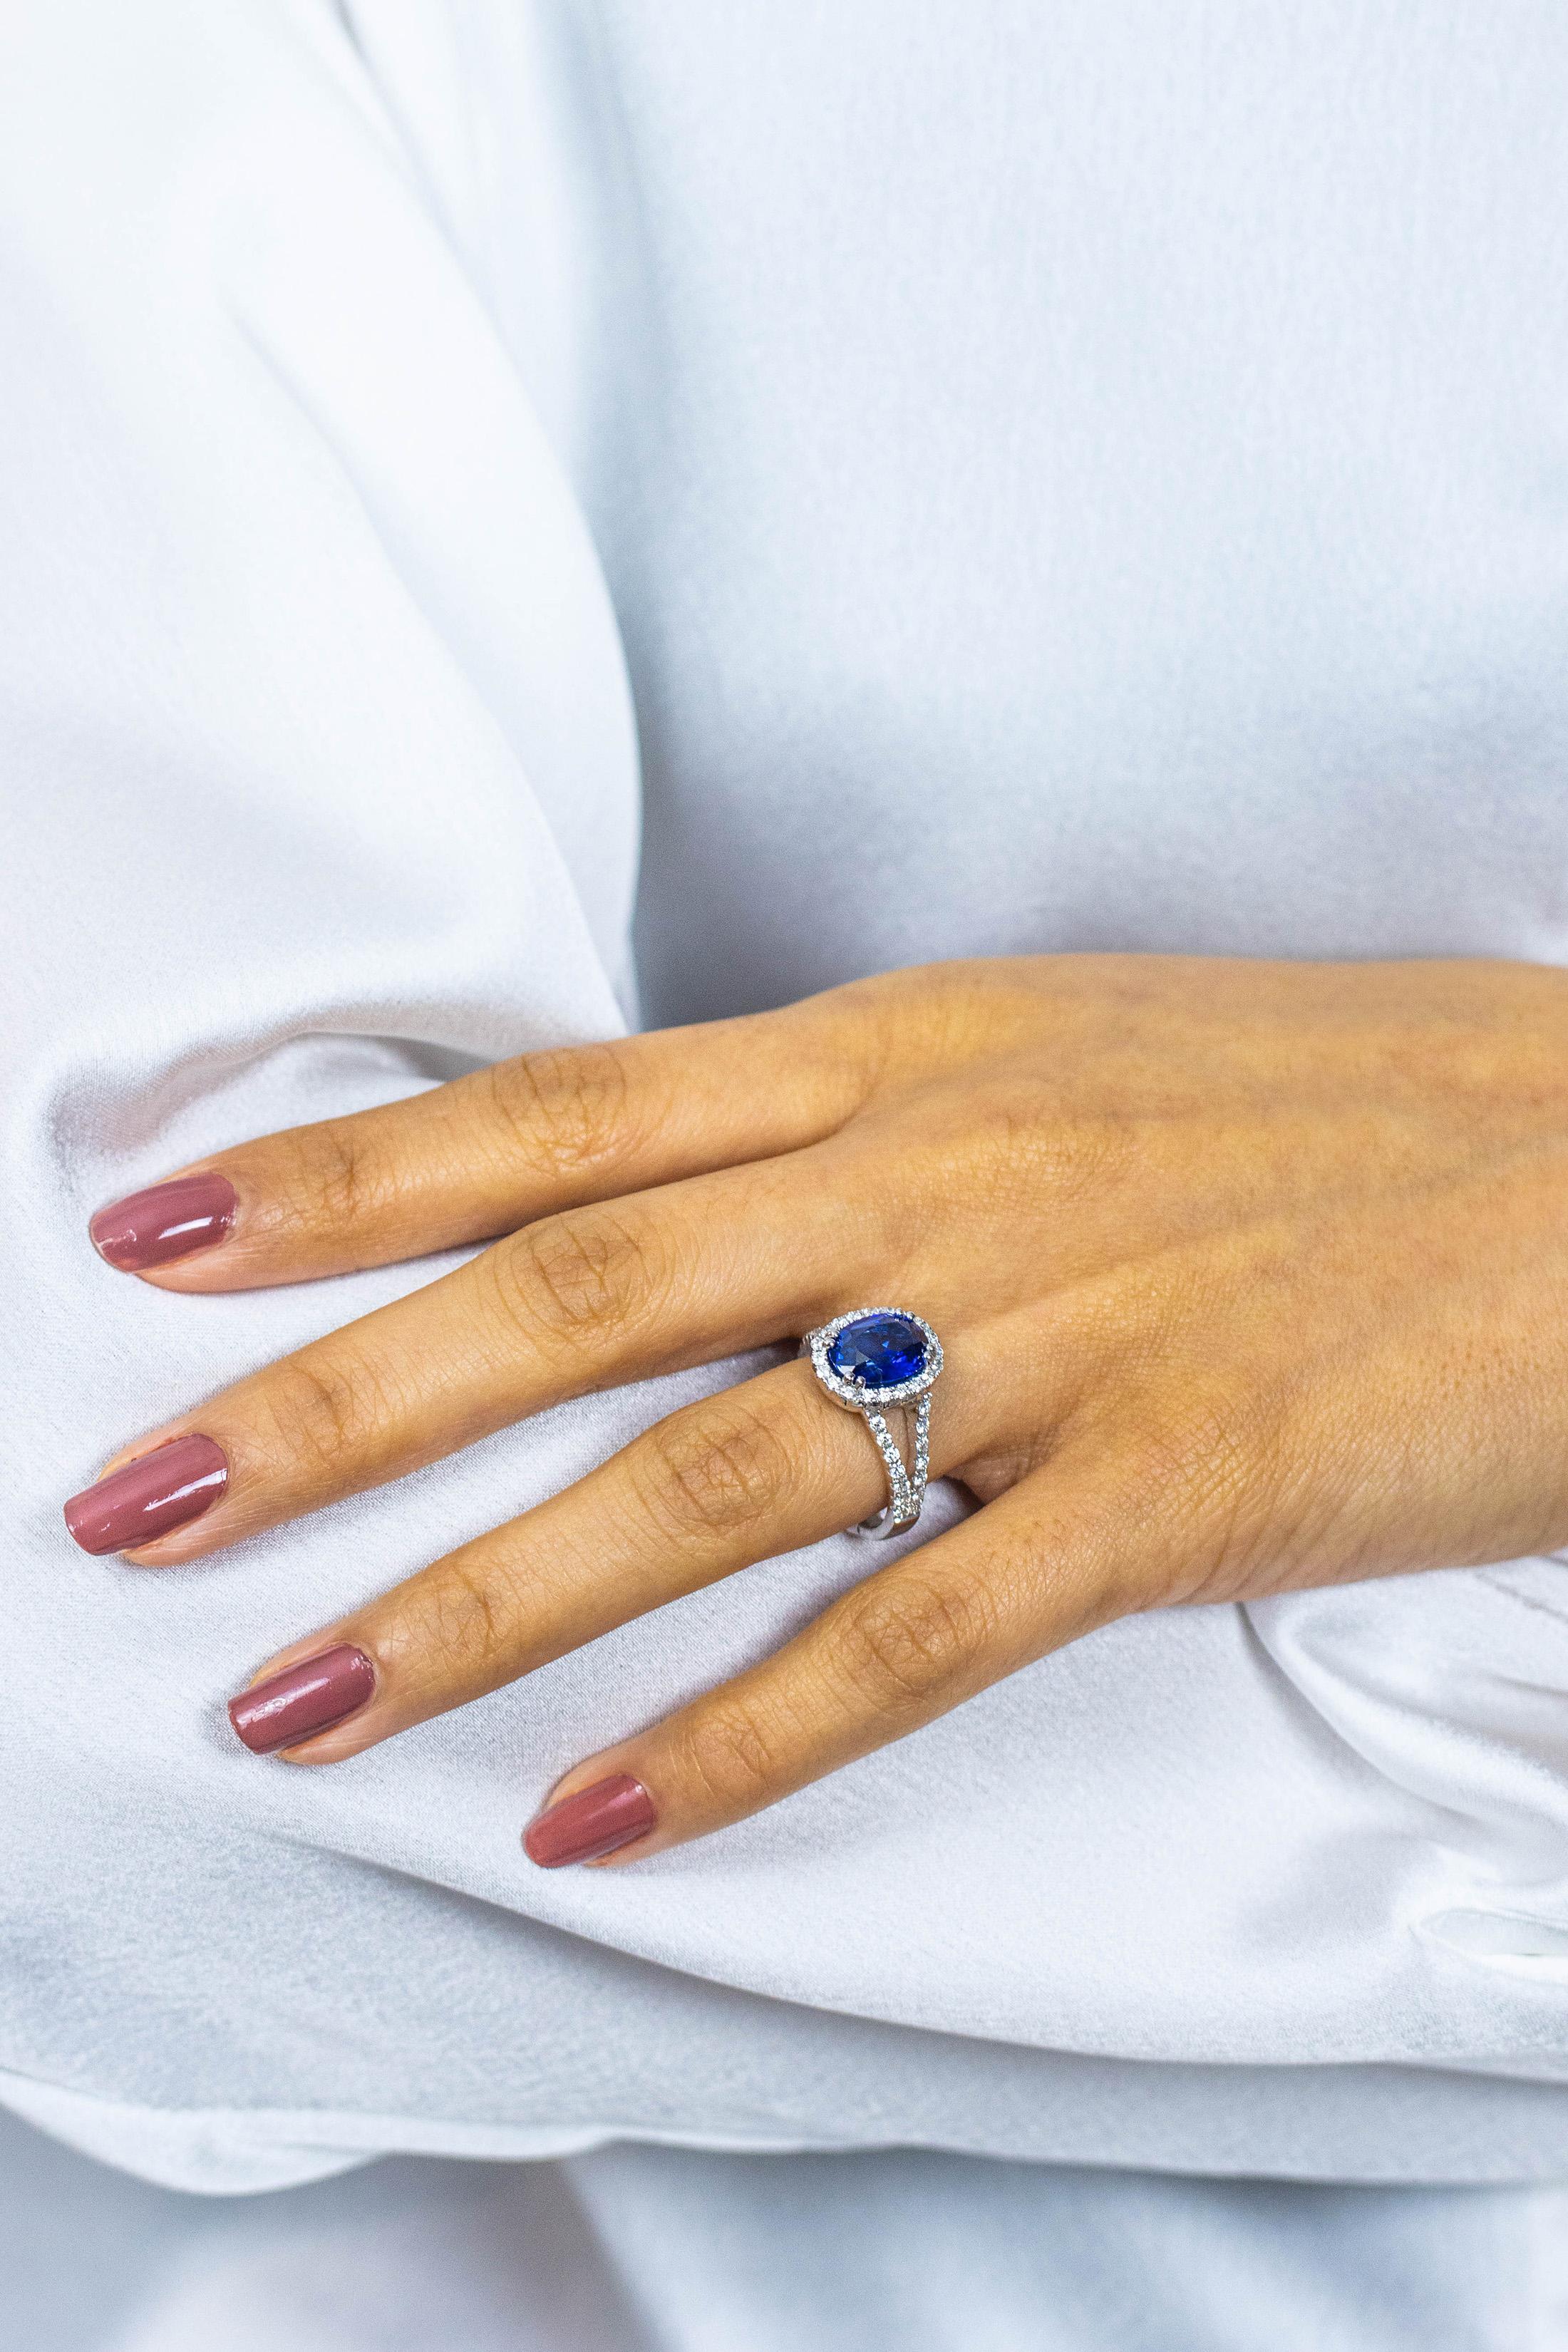 GIA Certified 2.68 Carat Oval Cut Heated Sri Lanka Sapphire Halo Engagement Ring For Sale 2